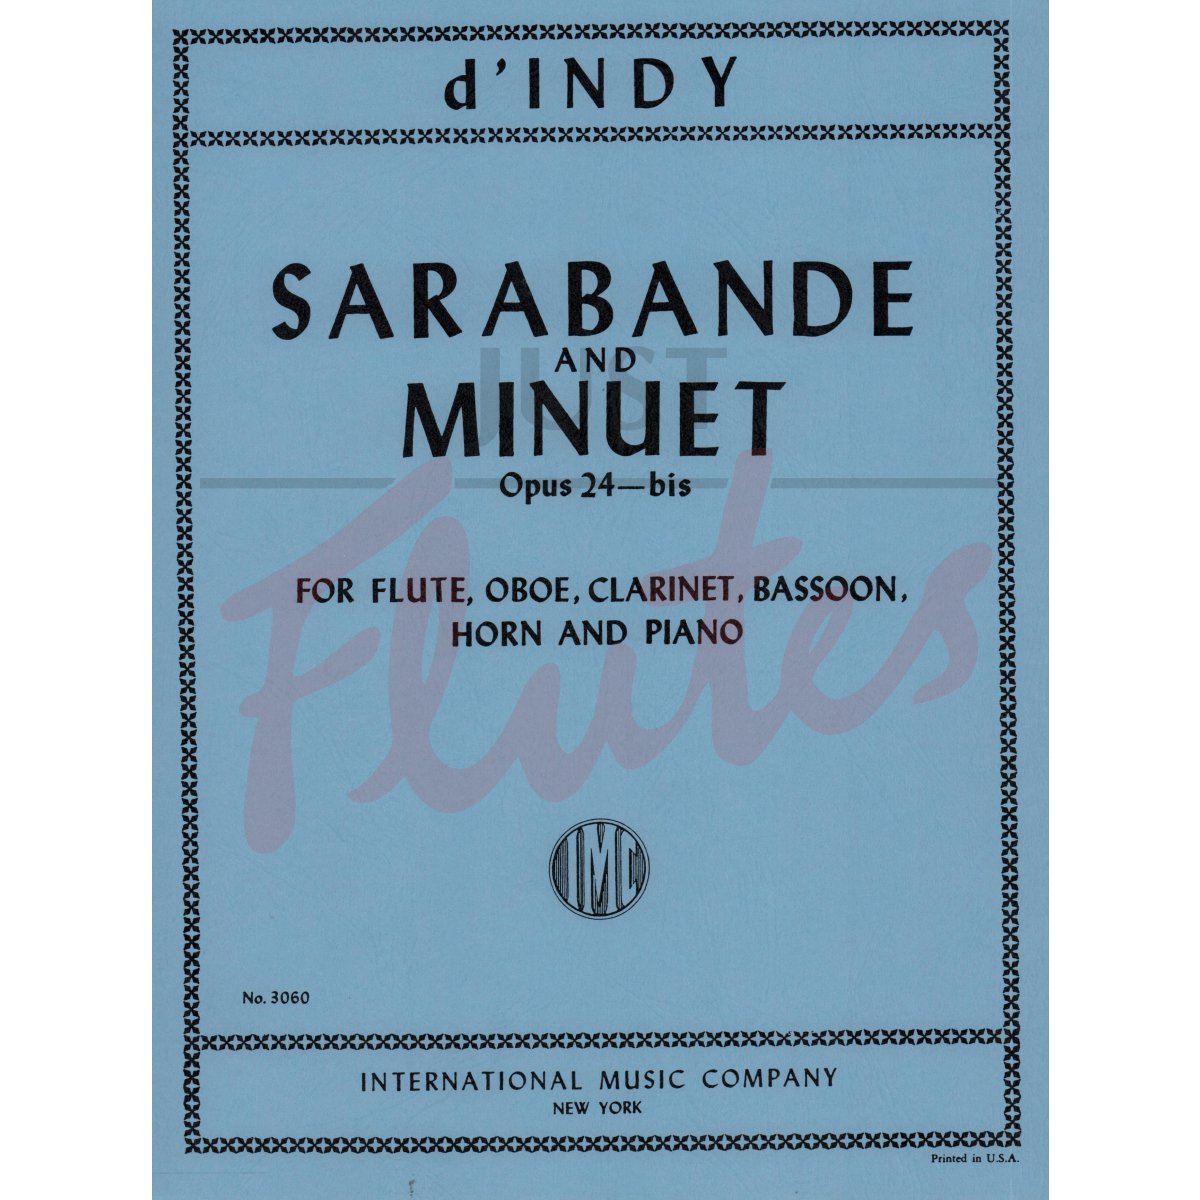 Sarabande and Minuet for Wind Quintet and Piano